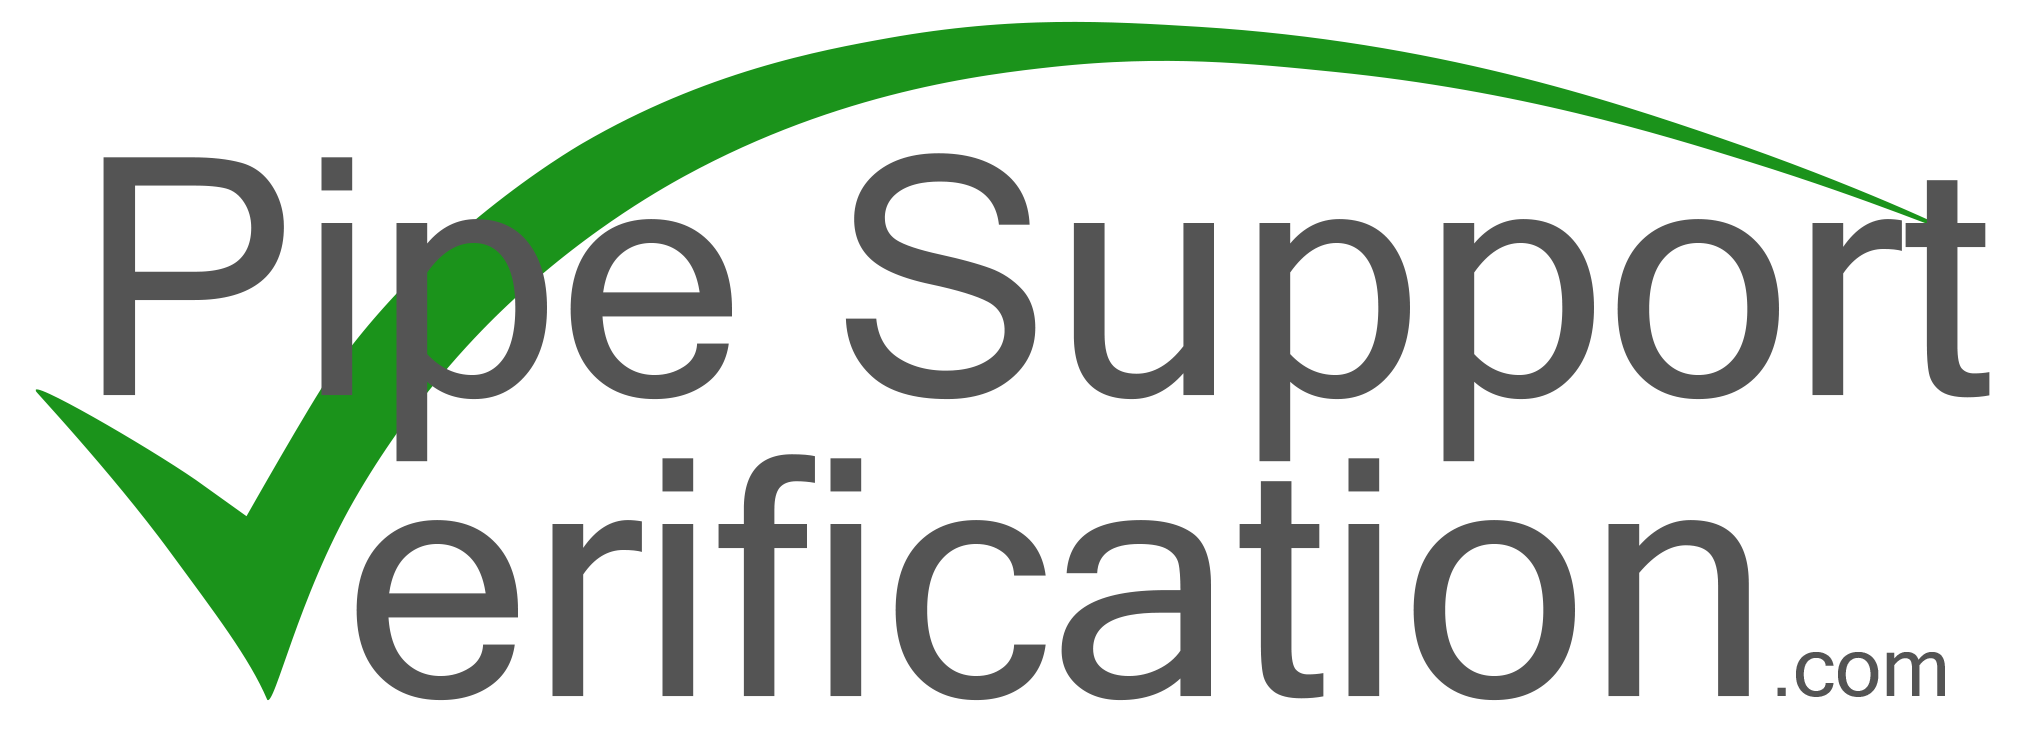 The logo of Pipe Support Verification